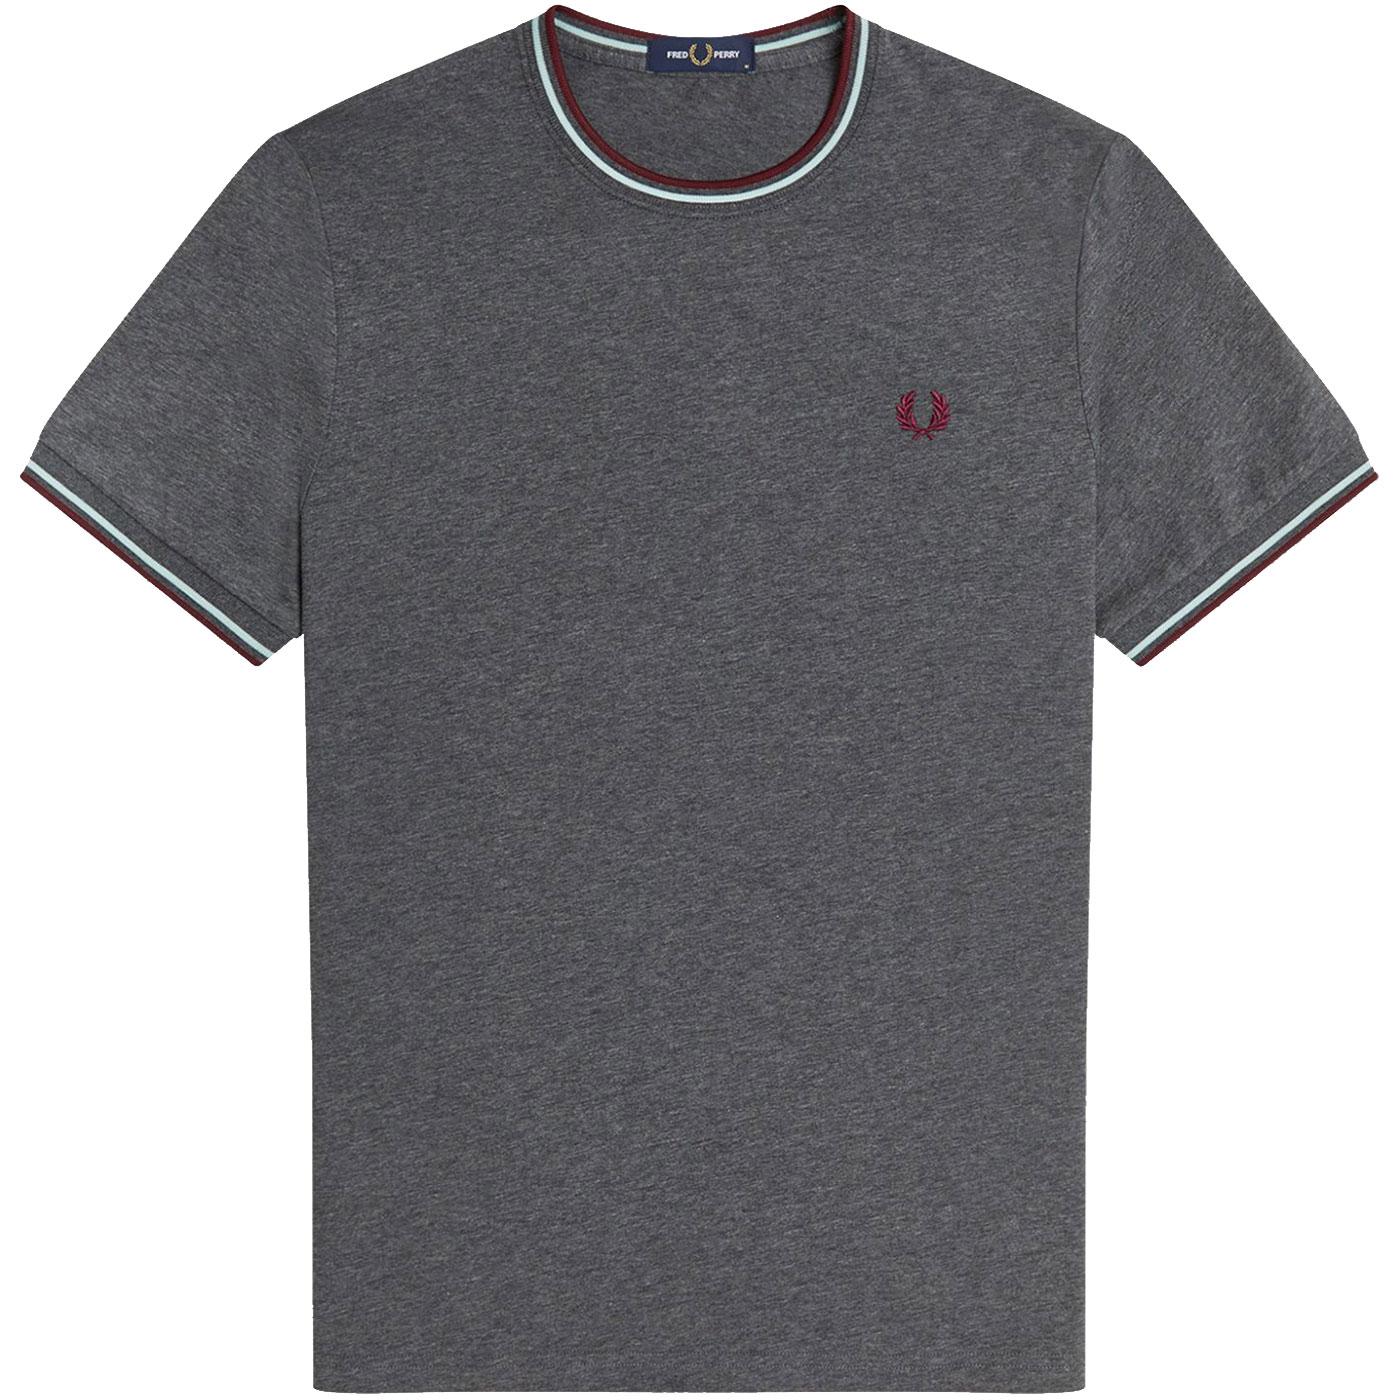 FRED PERRY M1588 Retro Twin Tipped Tee - Charcoal 